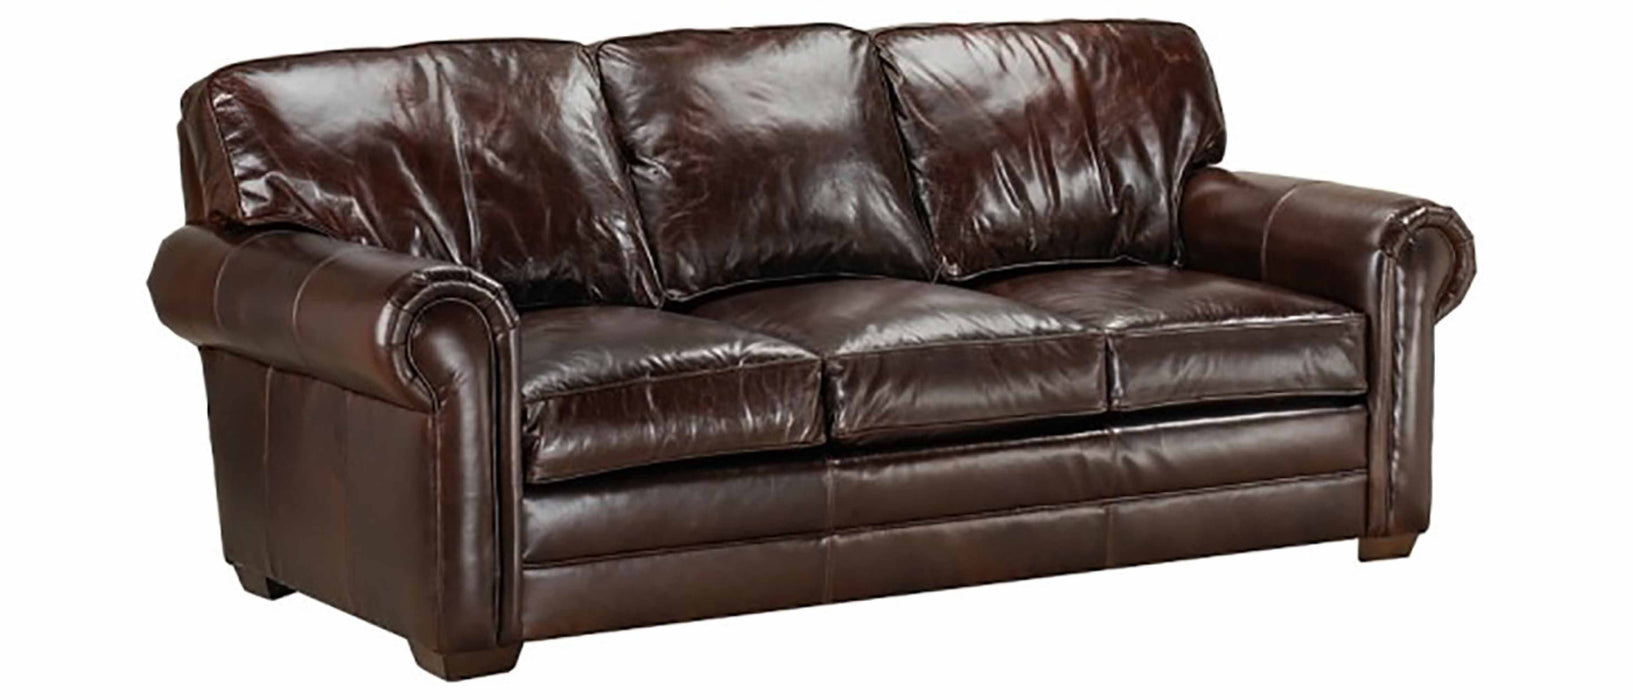 Kahne Leather Queen Size Sofa Sleeper